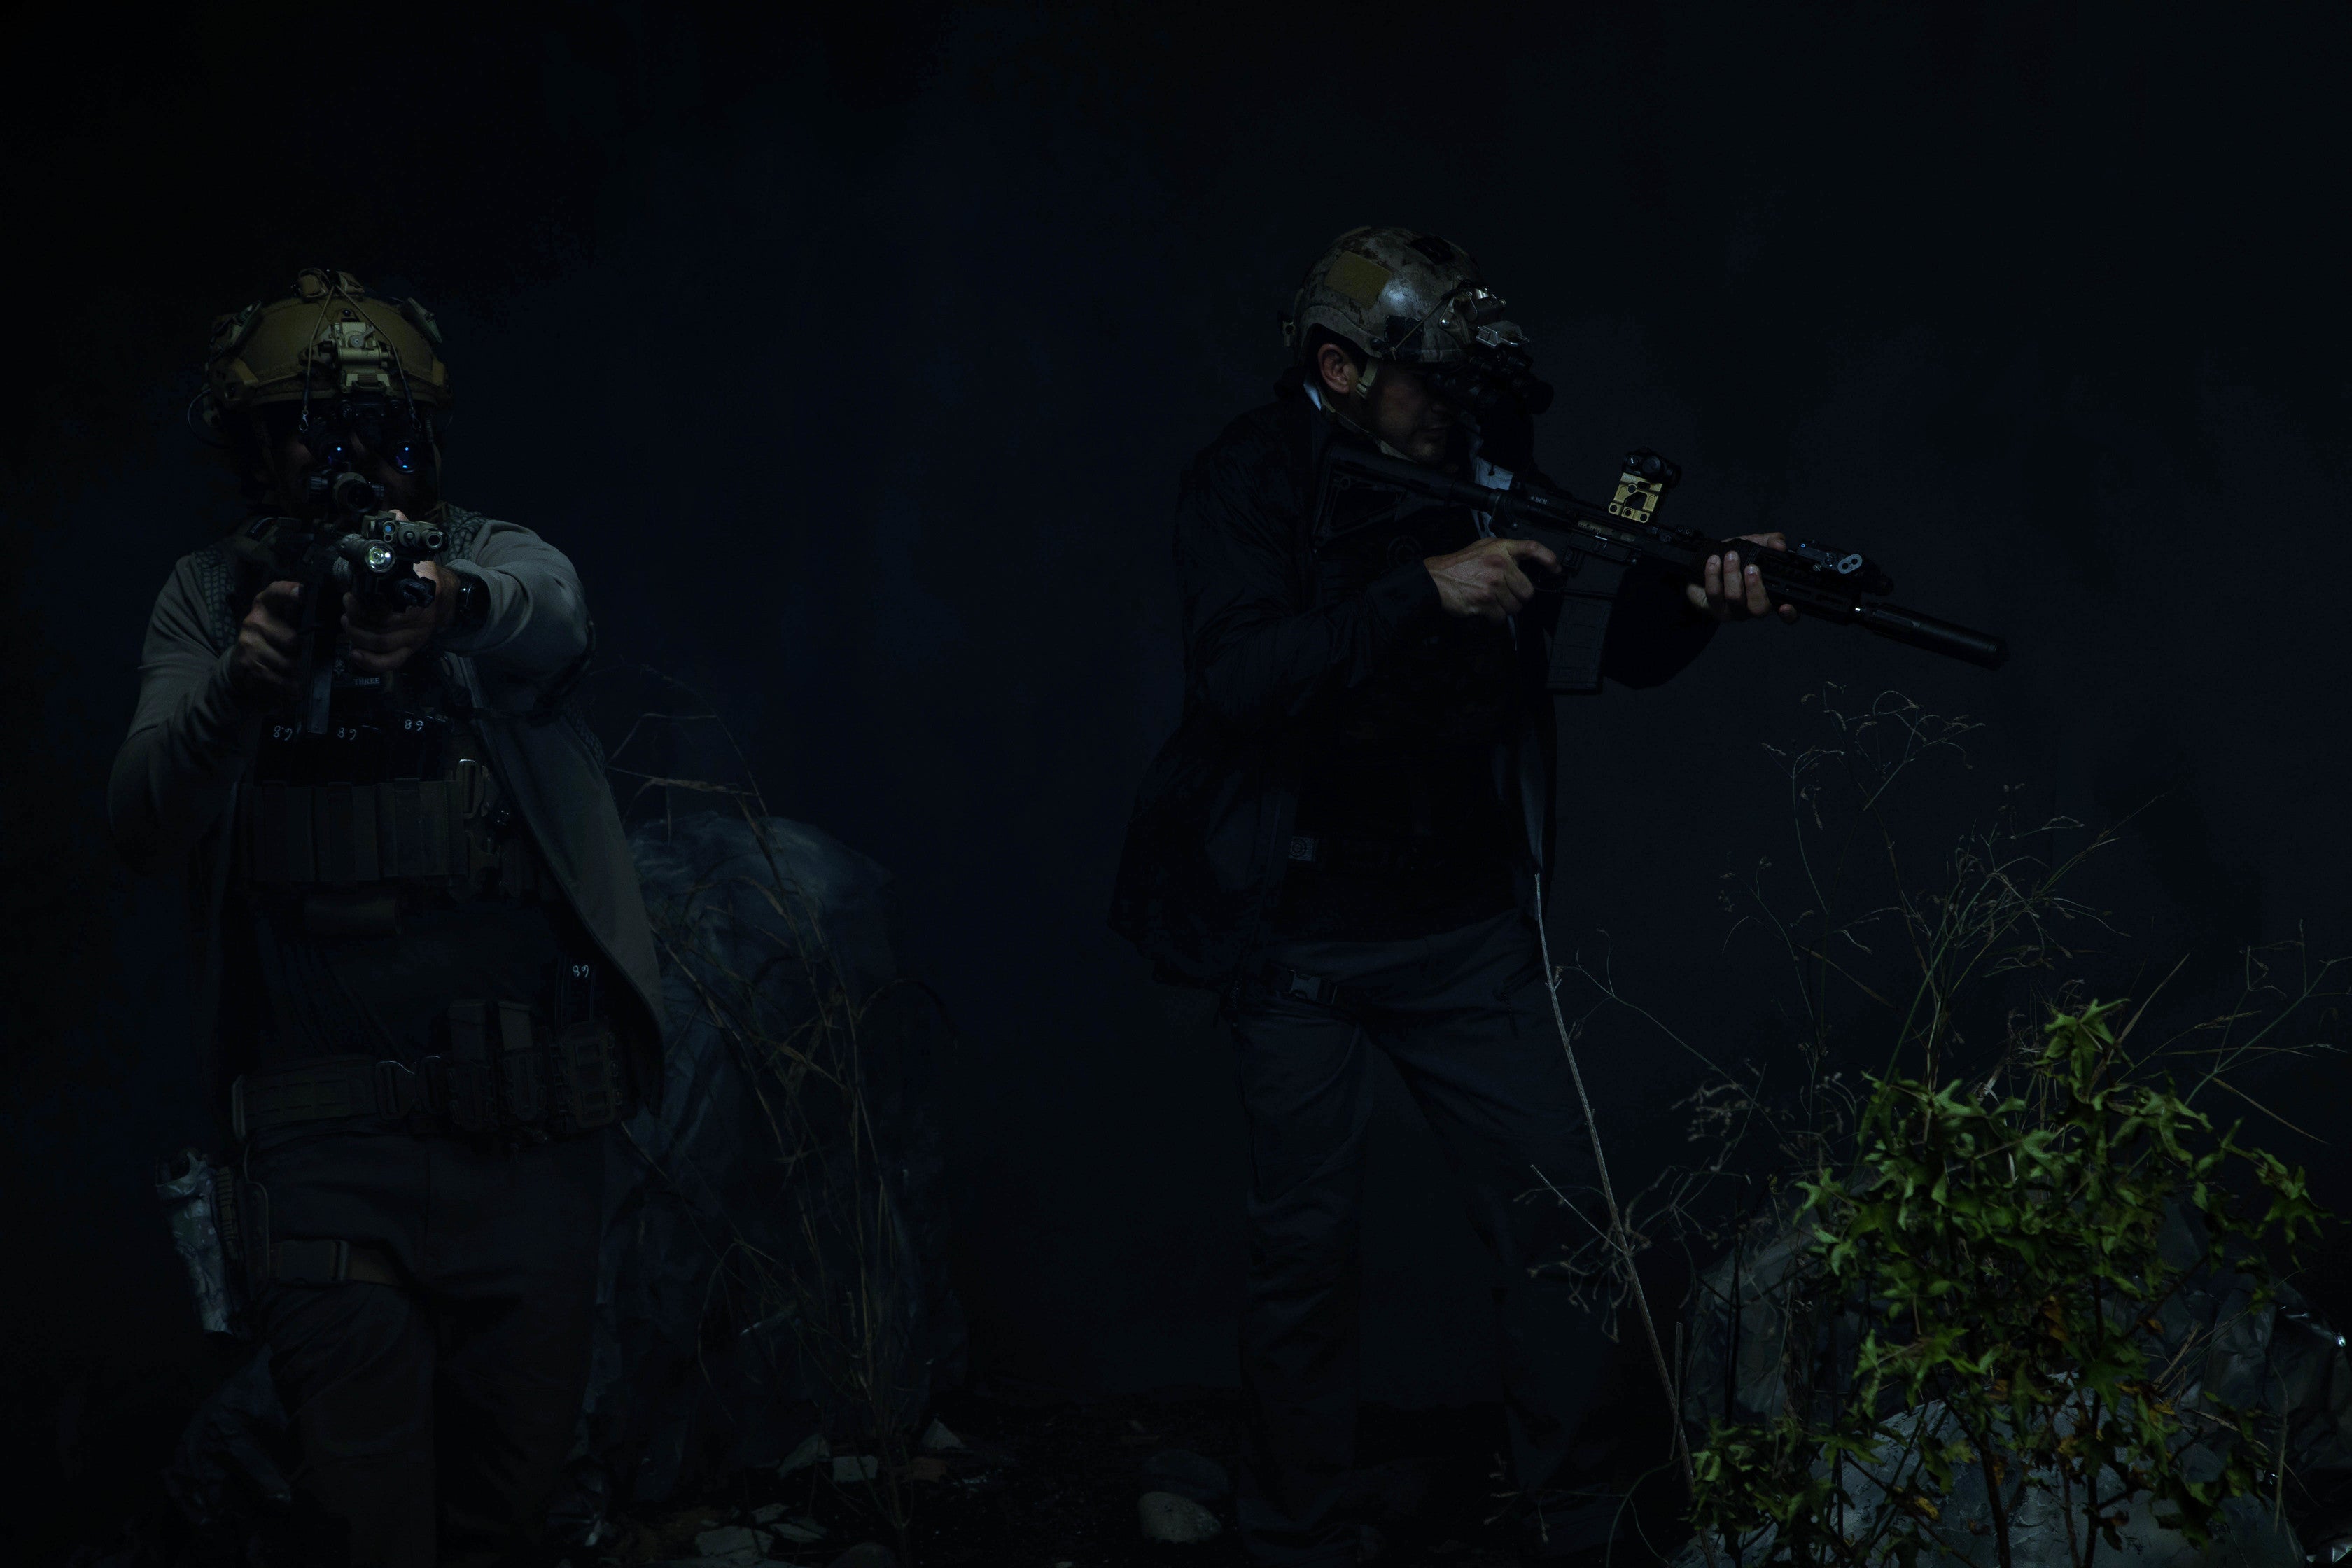 Men using scopes and tactical gear at night